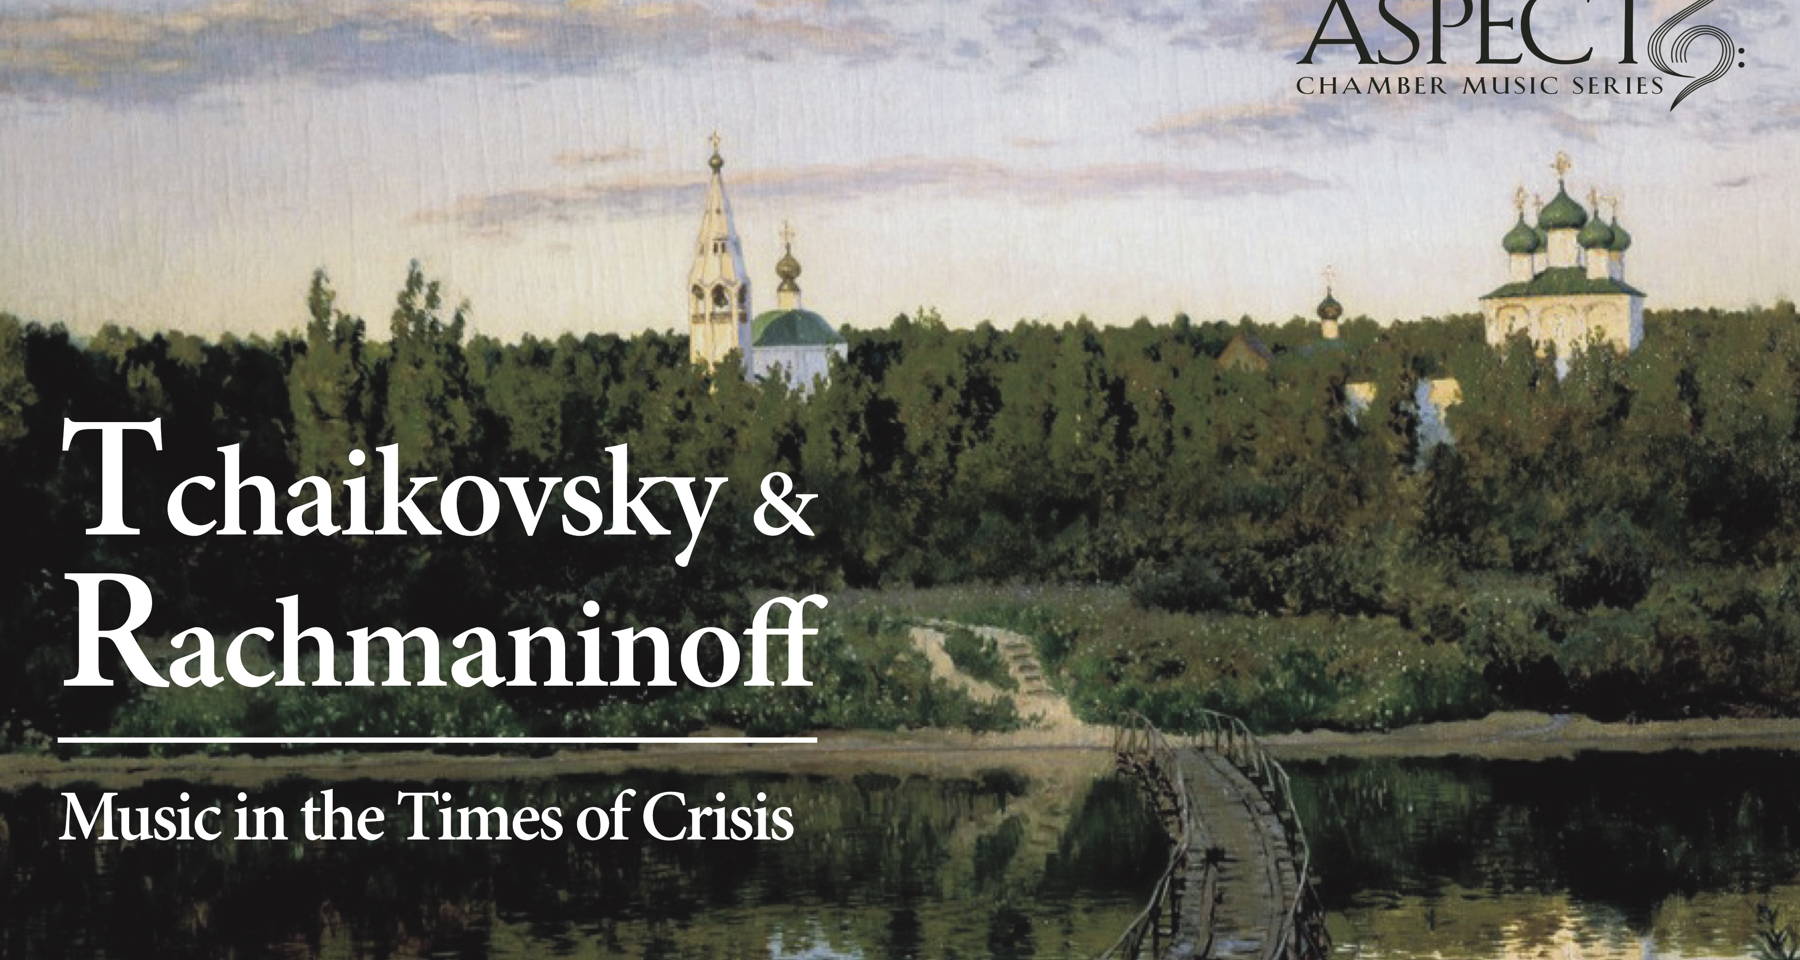 Tchaikovsky and Rachmaninoff: Music in Times of Crisis